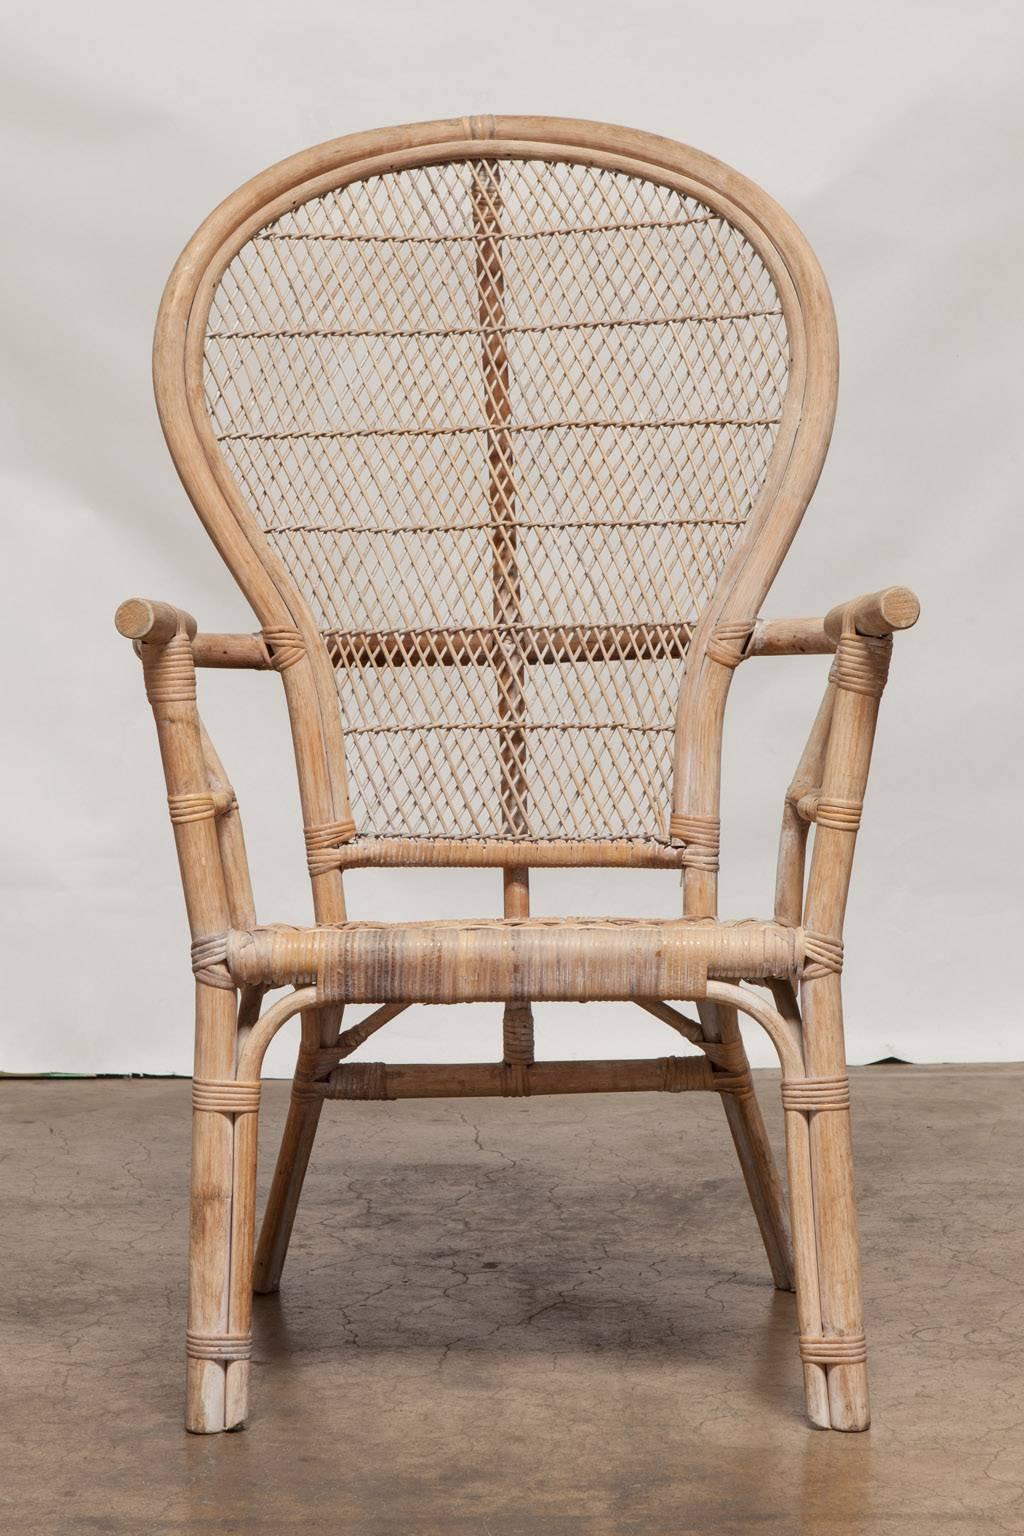 Distinctive rattan peacock armchairs featuring a fan shaped back with a woven fretwork design. Serpentine shaped arms with a woven seat are supported by round rattan legs.